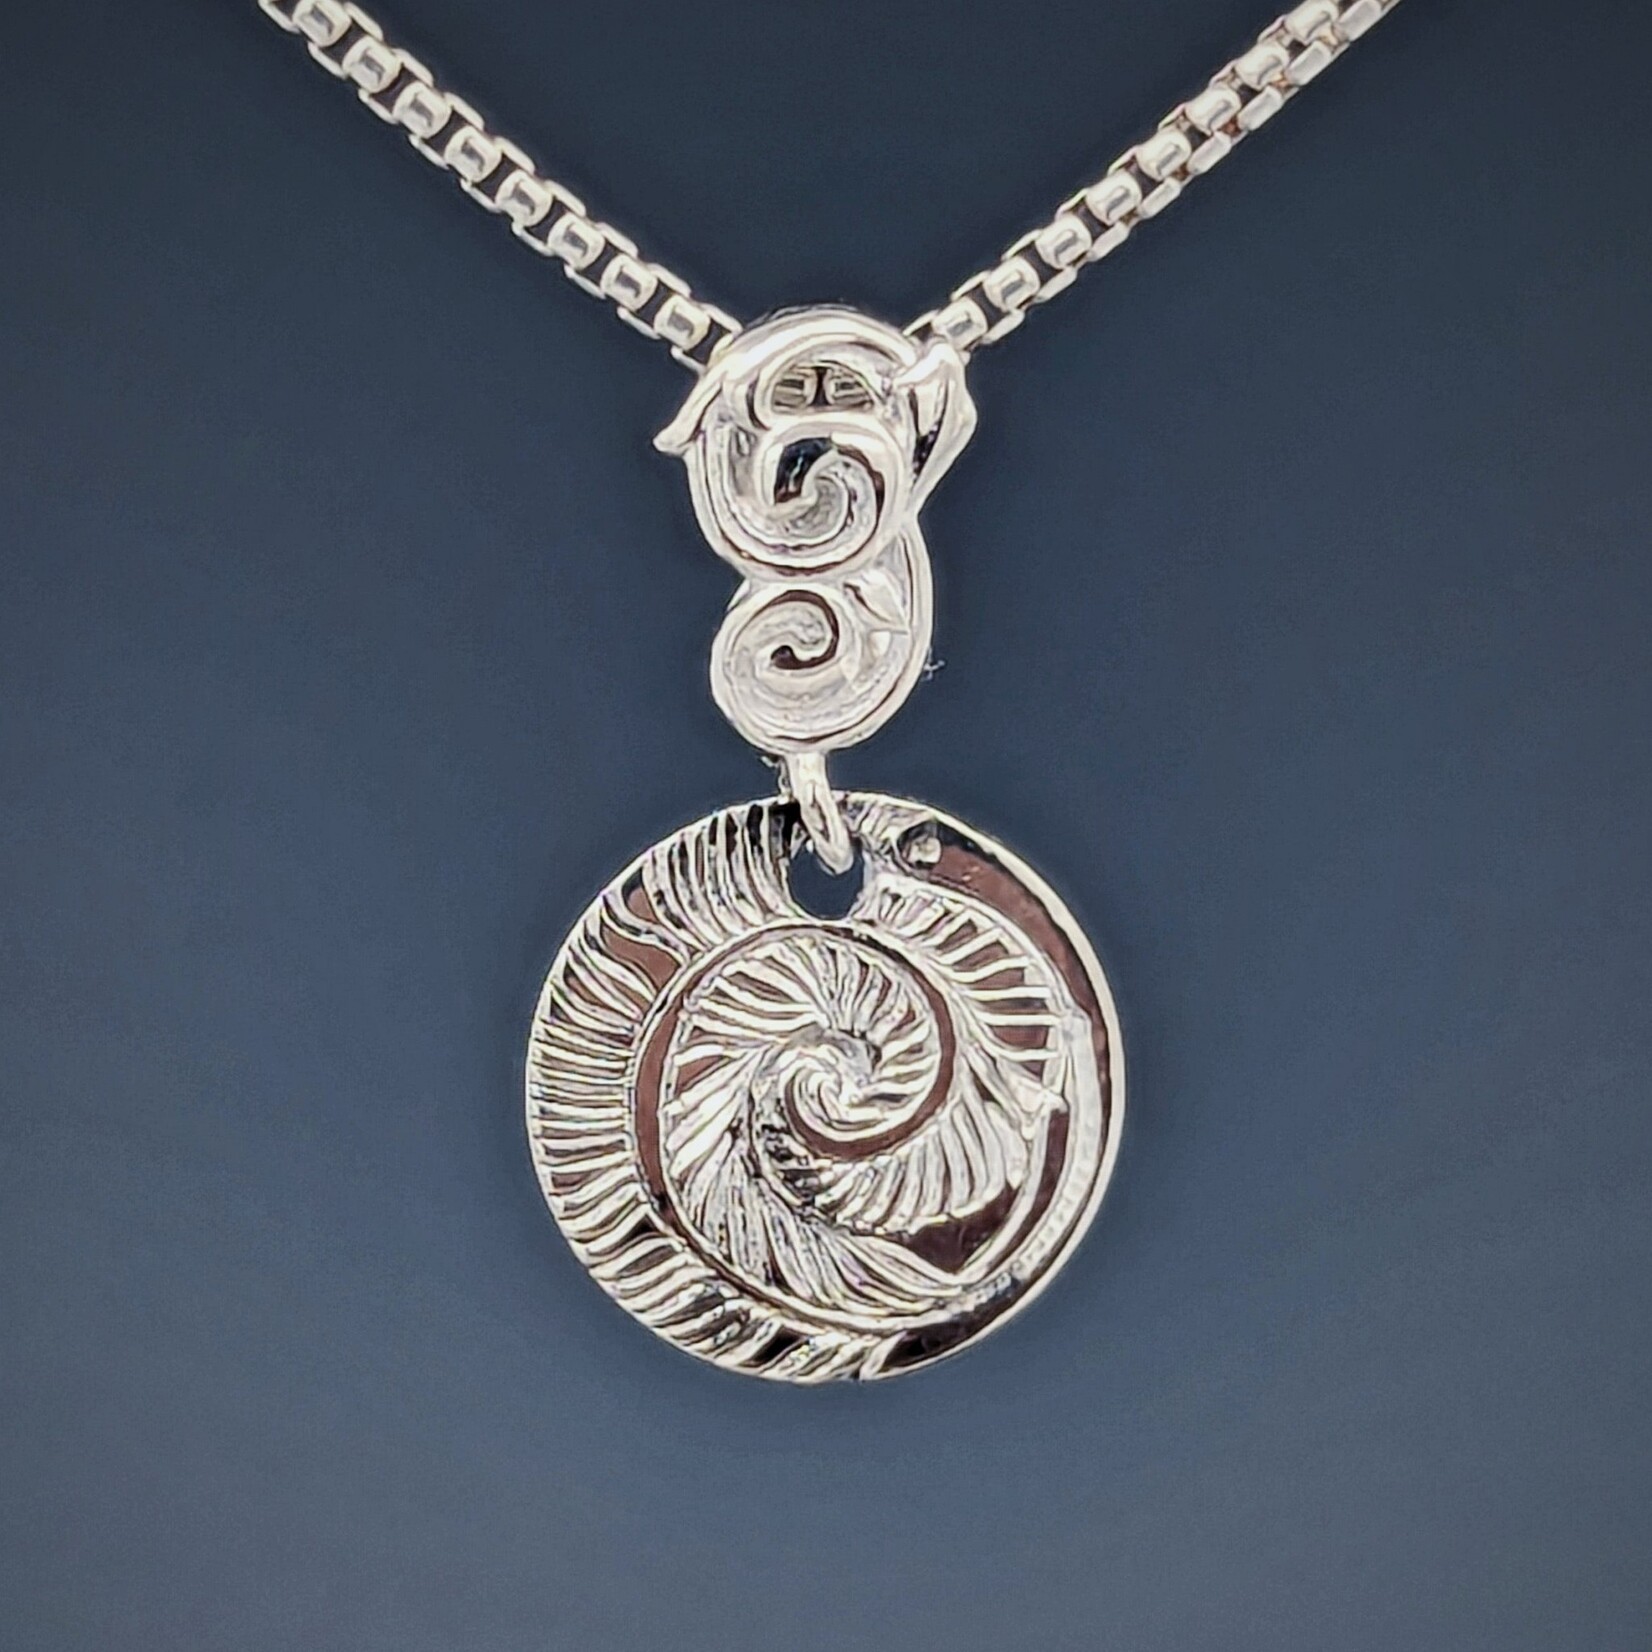 Modern Heirloom® Engraved Feather Micro-Medallion